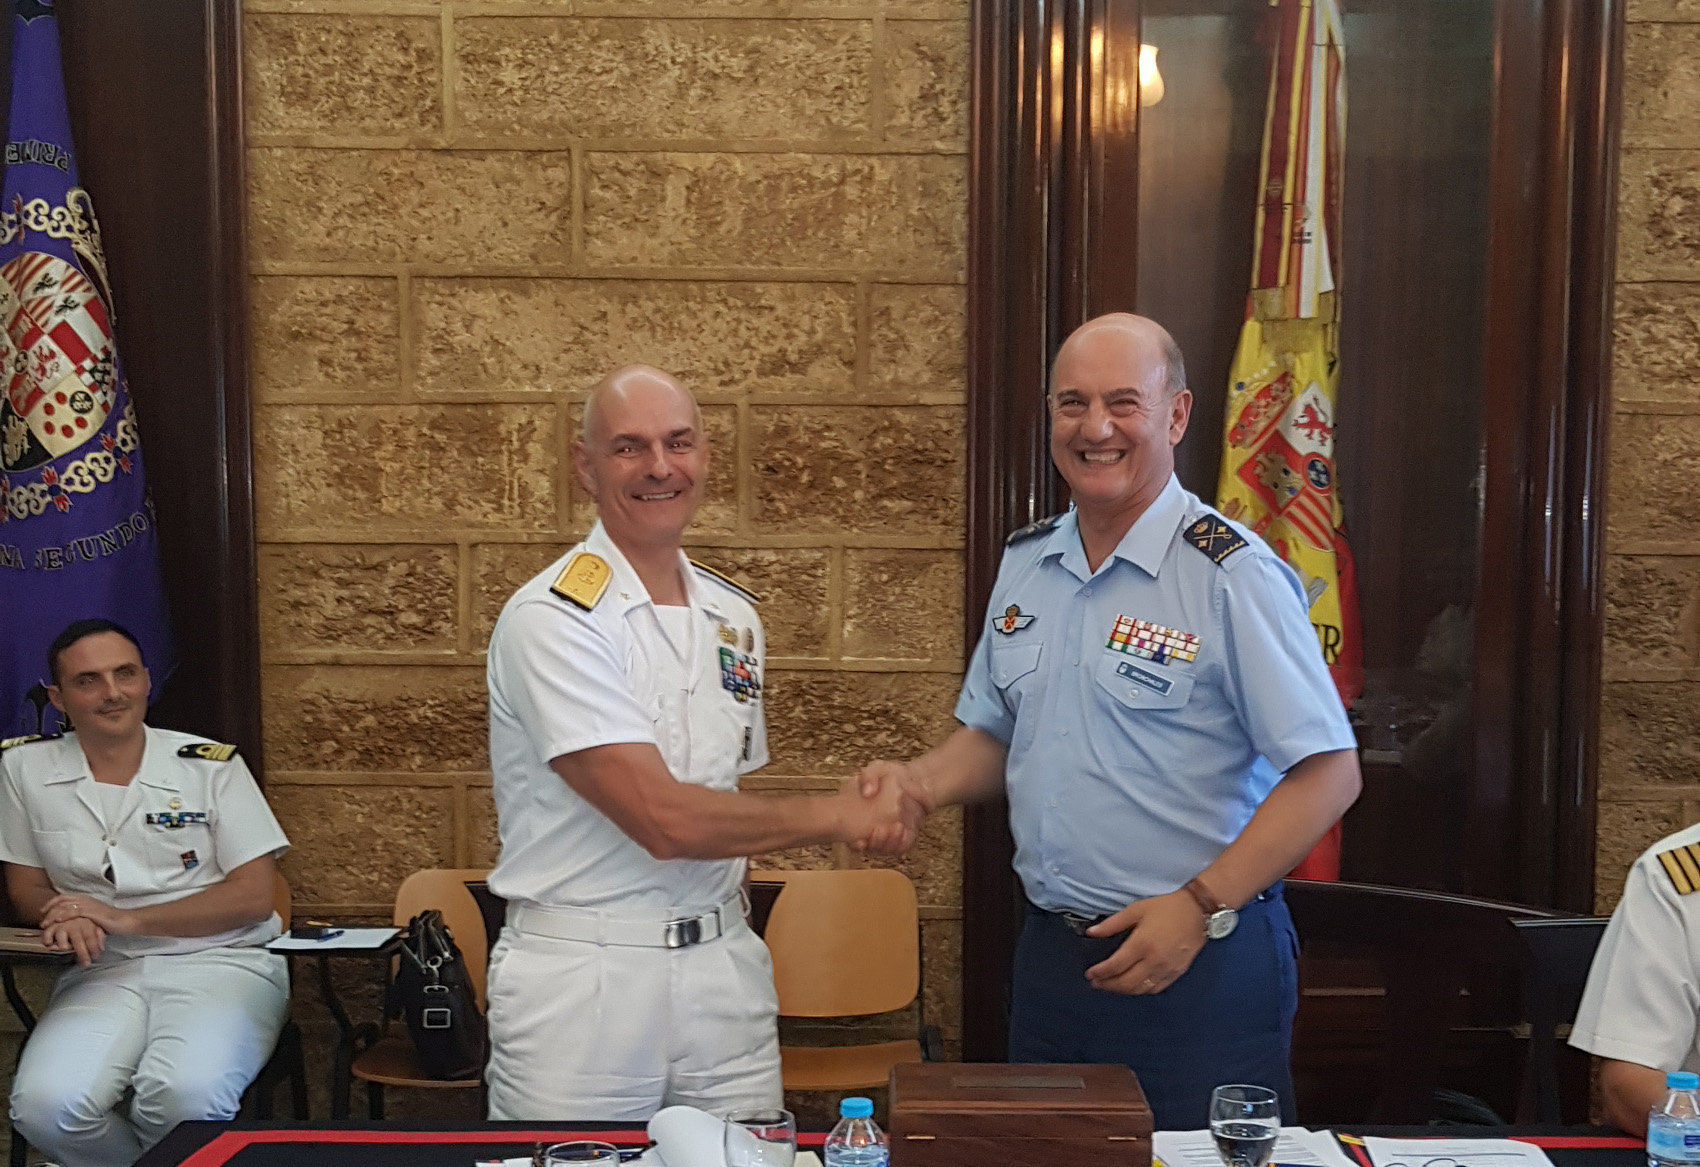 Meeting of the European Amphibious Initiative steering group